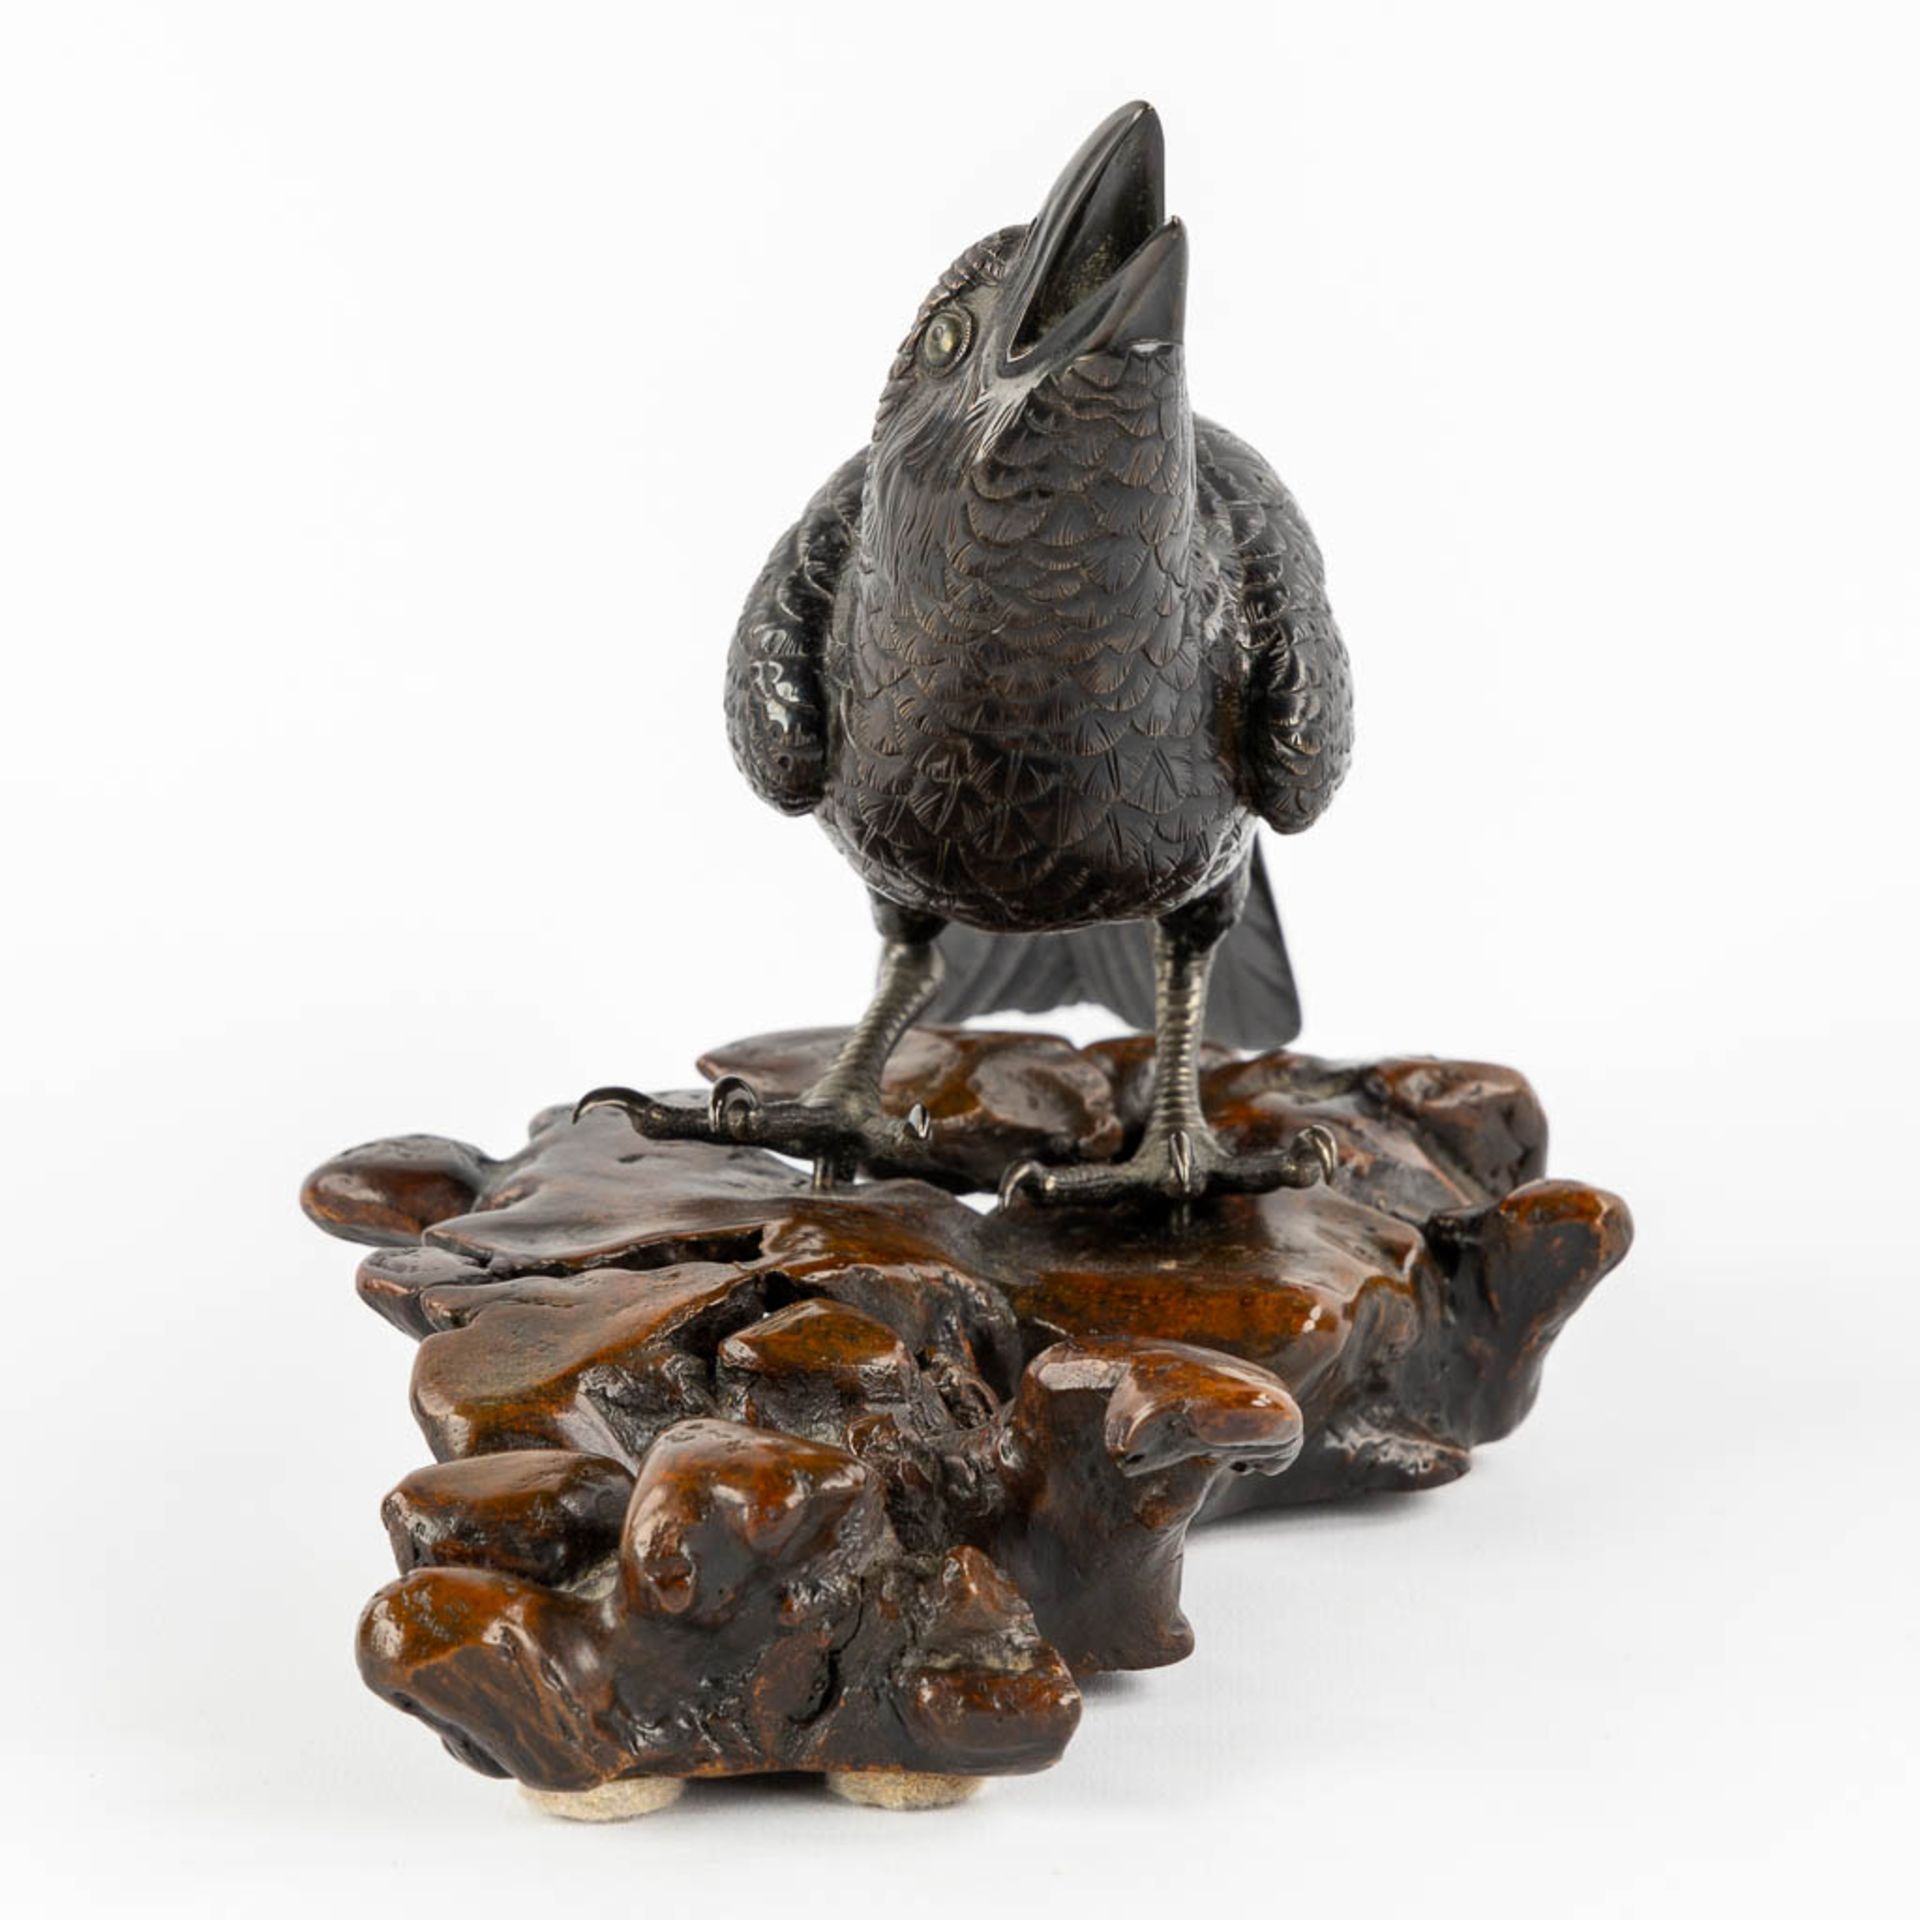 A Raven, patinated bronze mounted on a wood base. Probably Japan. (L:17 x W:30 x H:17 cm) - Image 6 of 10